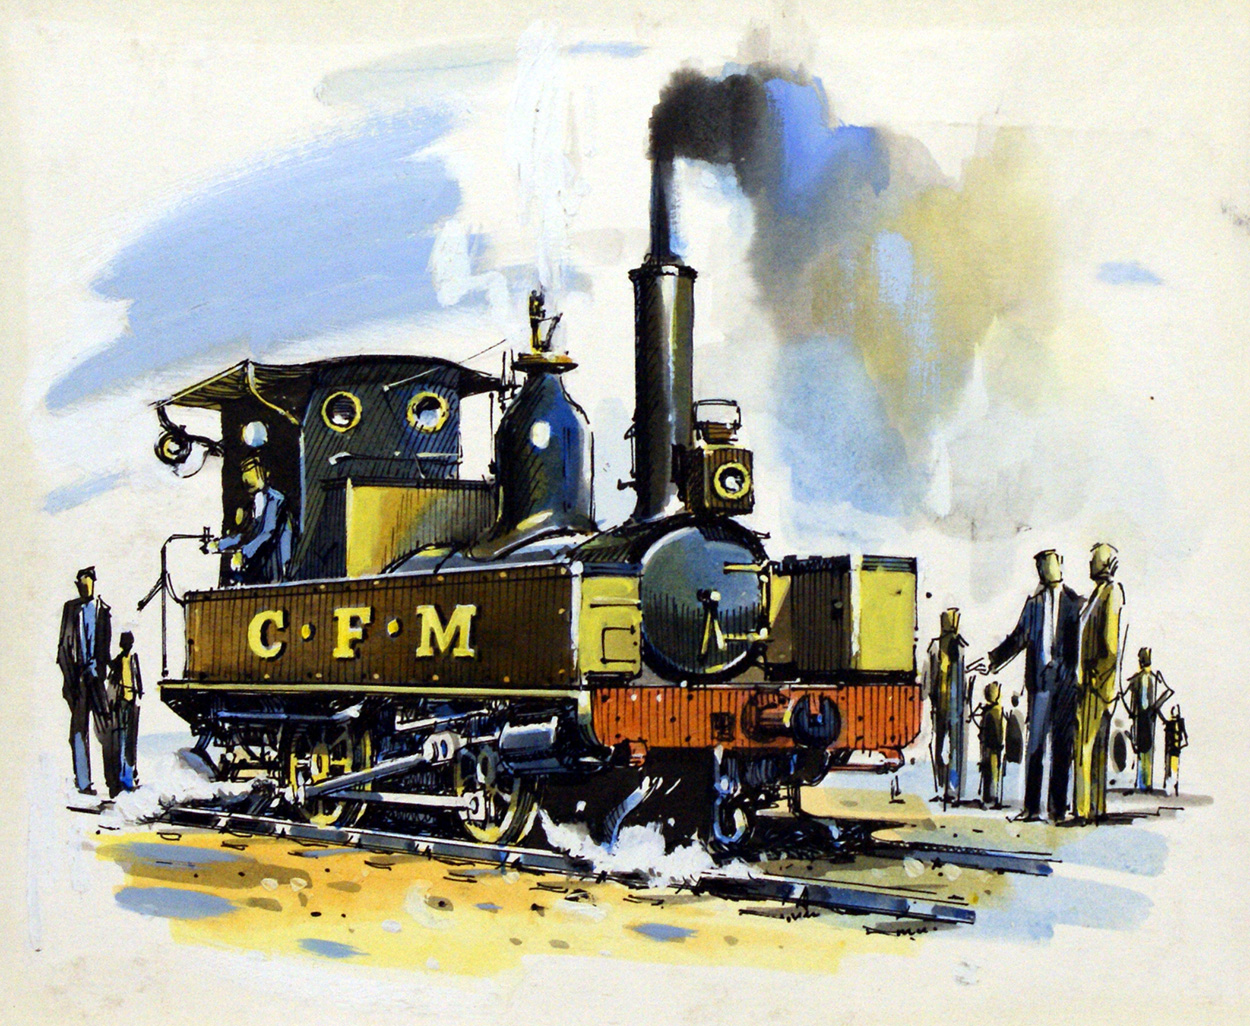 Stoking up the Engine (Original) art by John S Smith at The Illustration Art Gallery